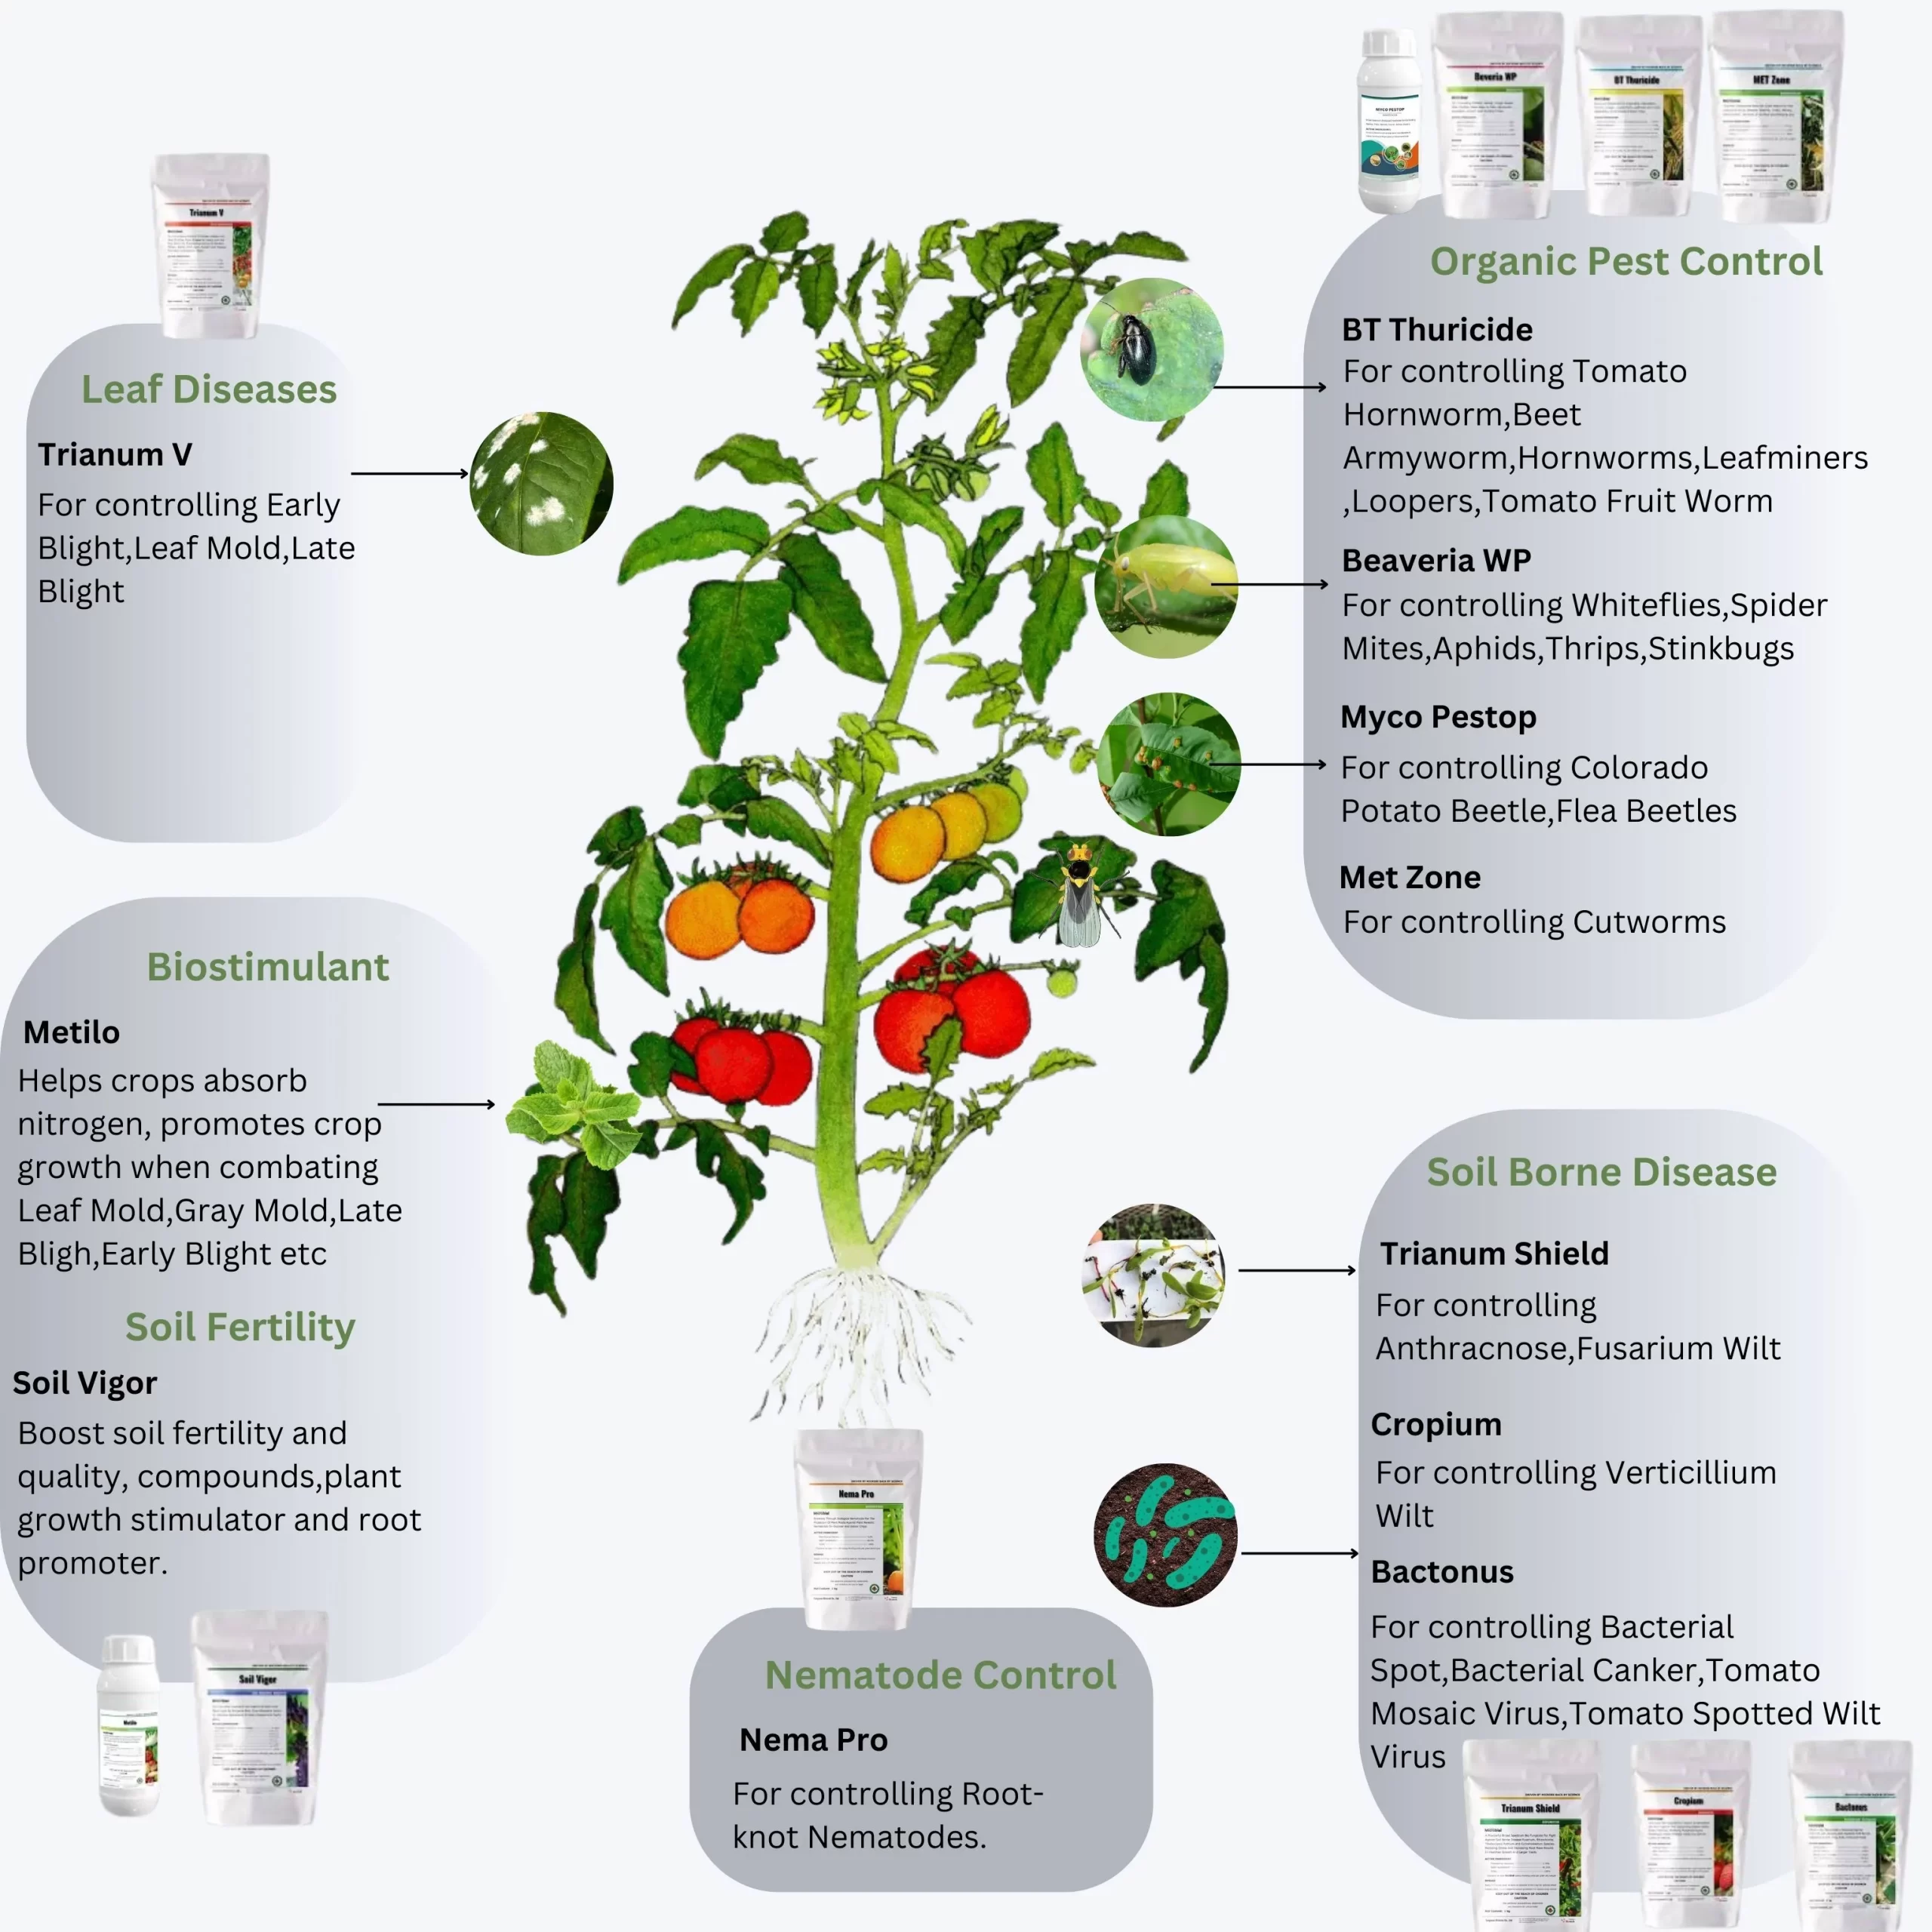 Sustainable microbial solutions for tomato pest management